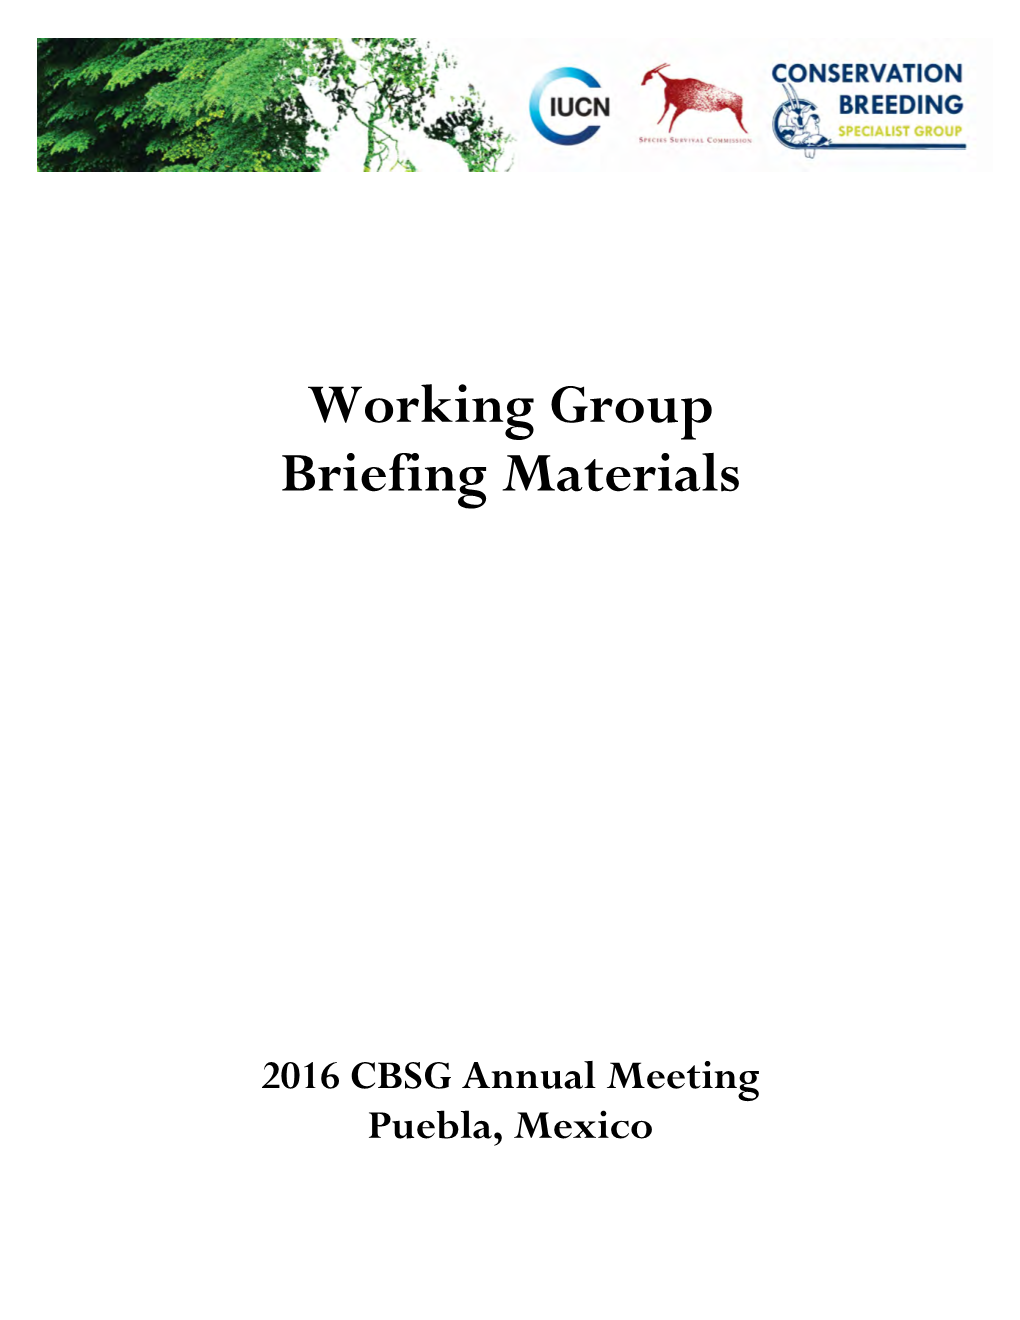 Working Group Briefing Materials